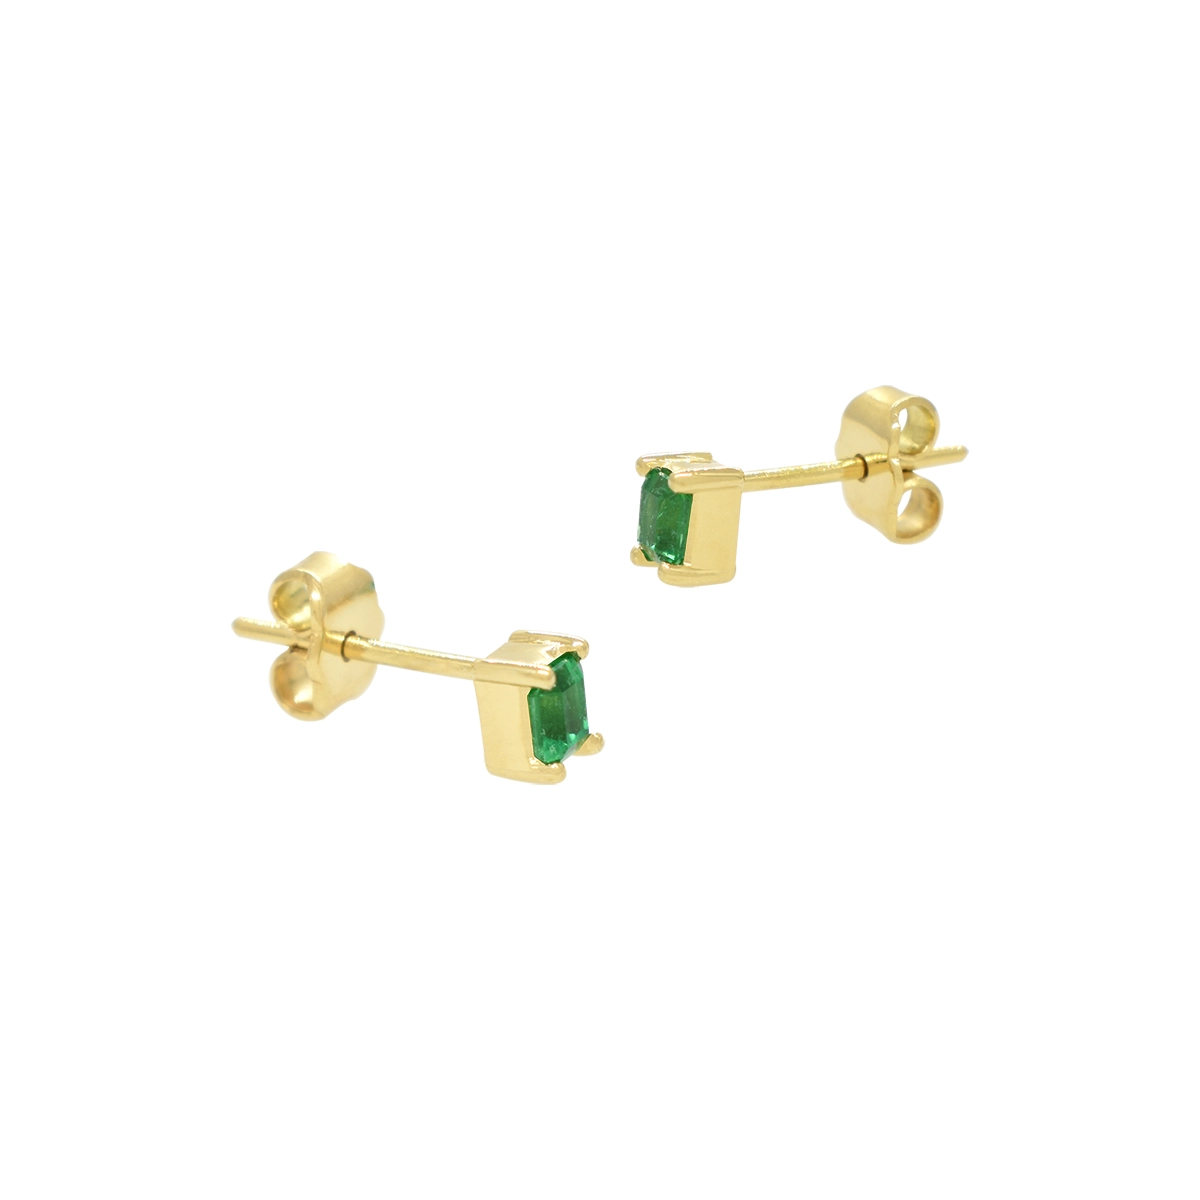 Small Emerald Stud Earrings in 18K Gold Classic Prong Setting